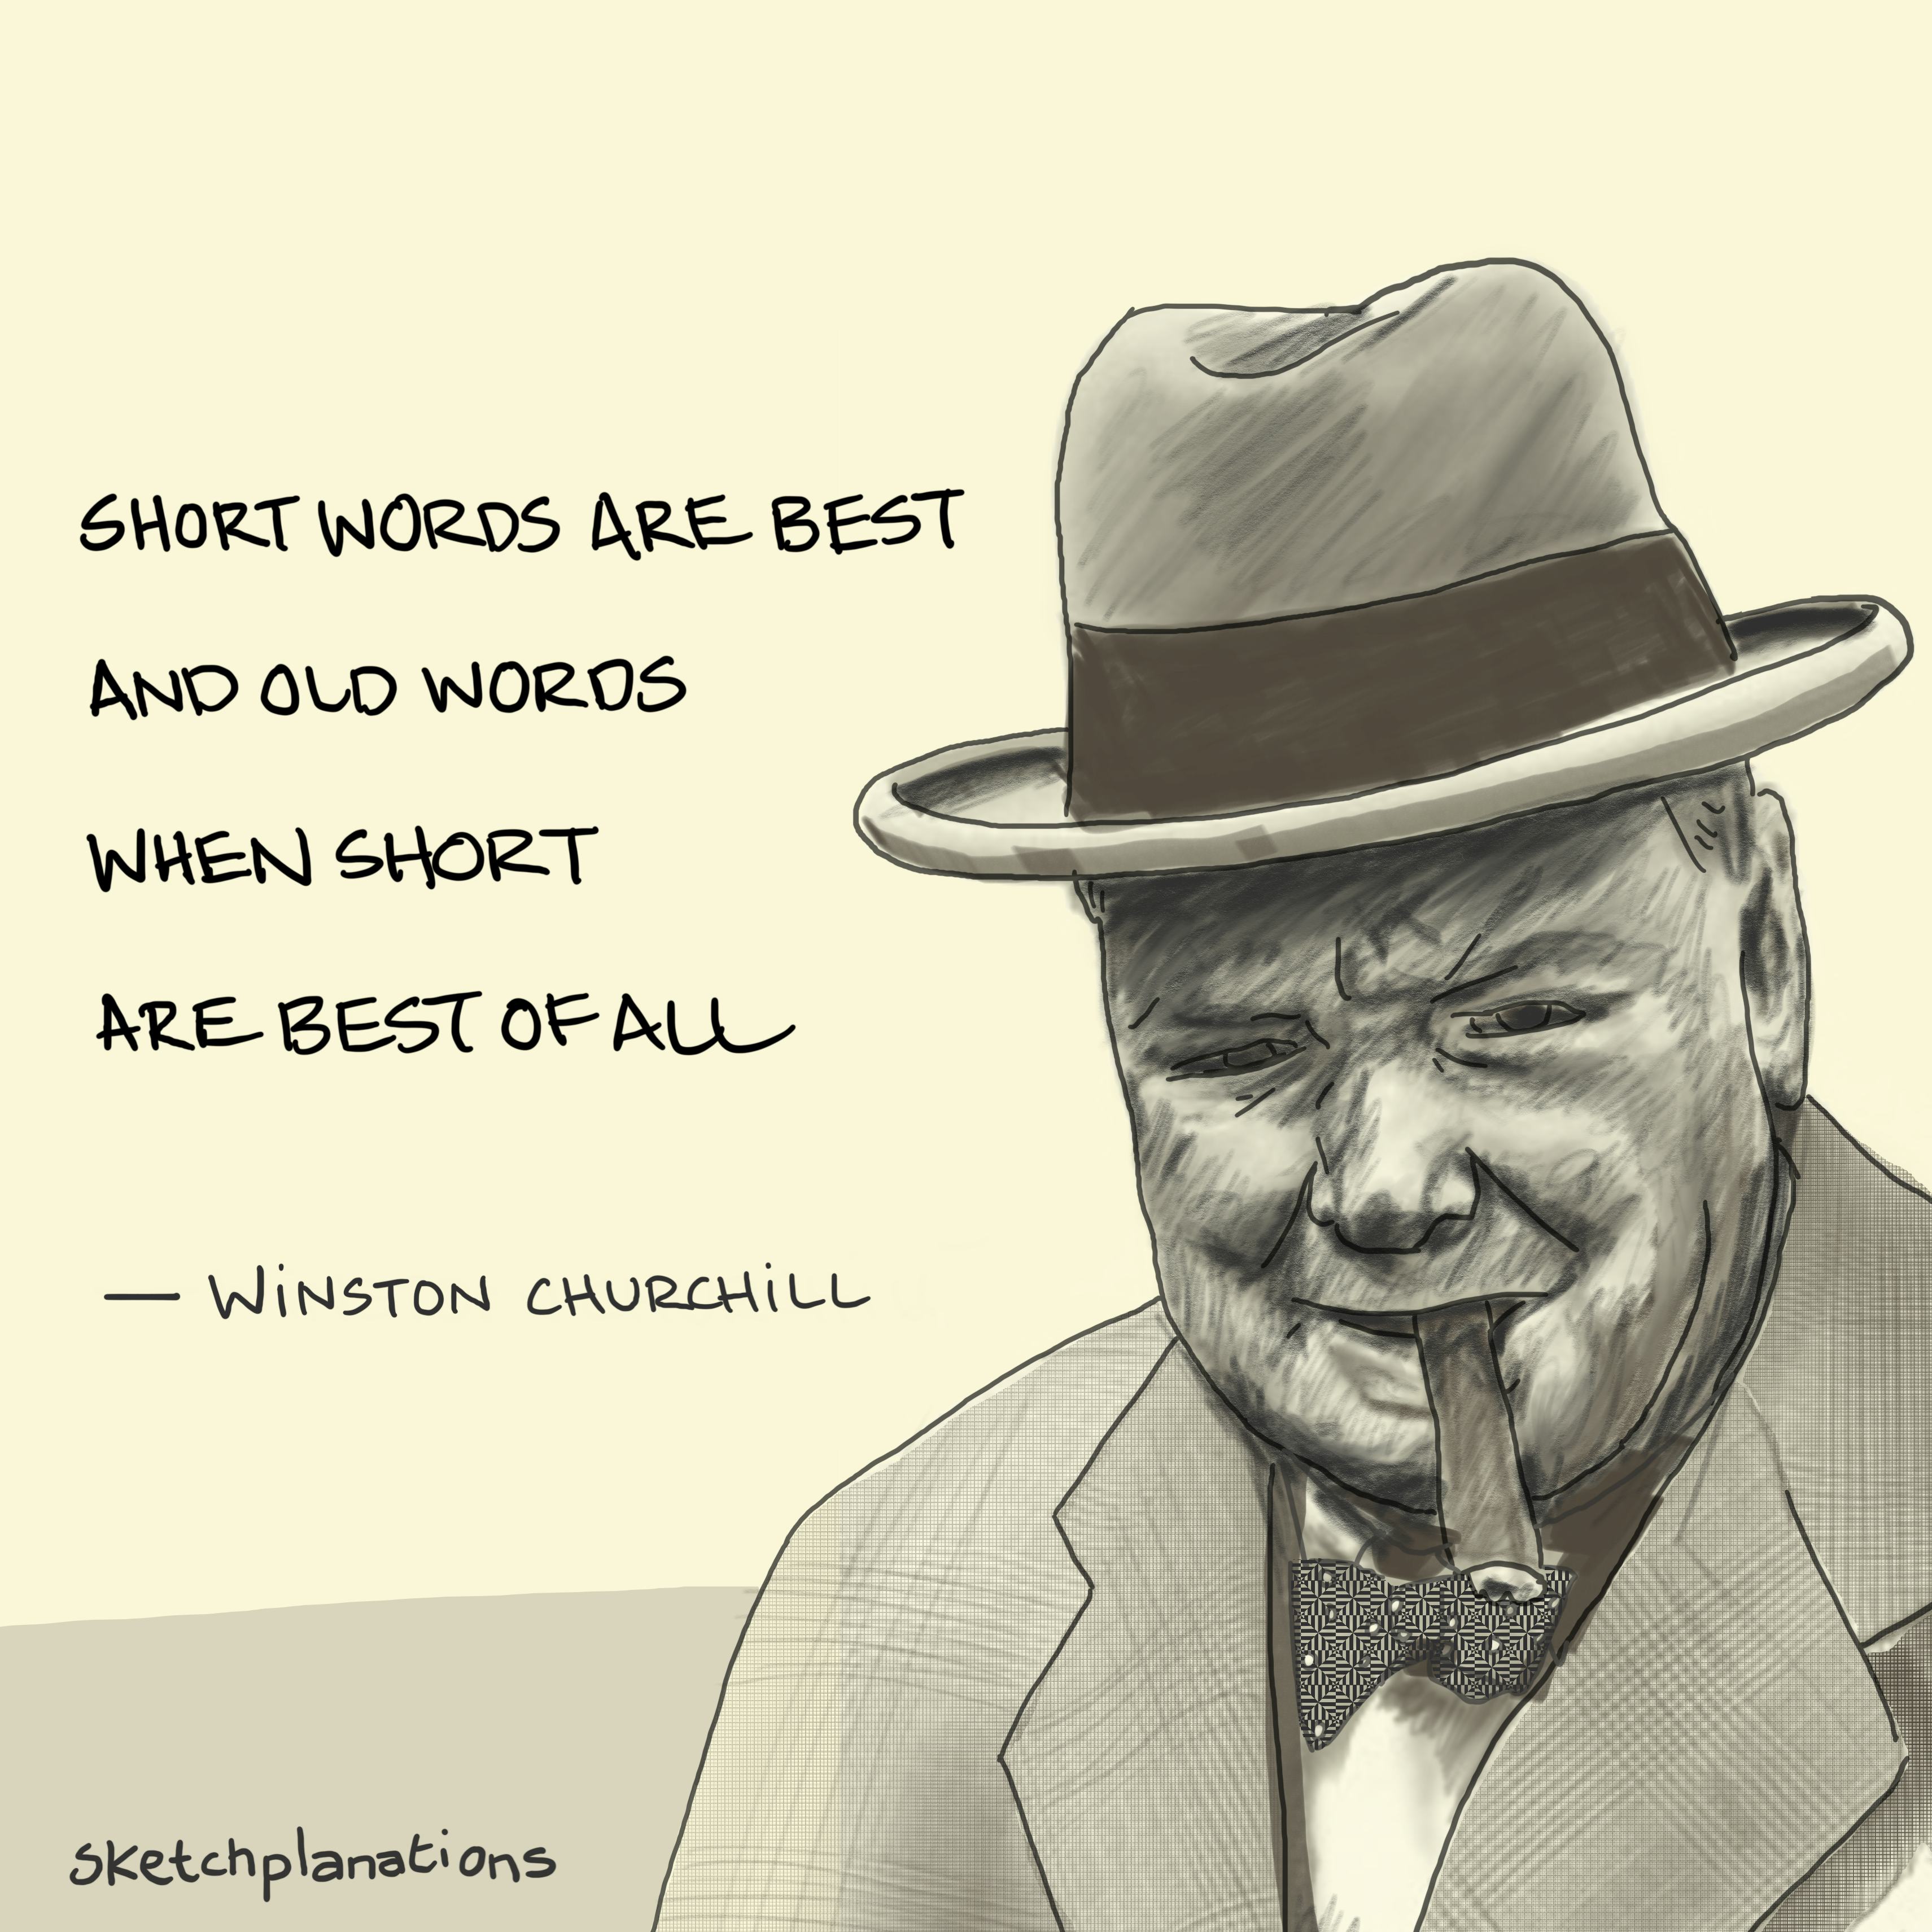 Short Words Are Best illustration: A quote by Winston Churchill, about how using short words is best, appears next to an iconic portrait of the man himself wearing a Homburg hat and bow-tie, whilst smoking a big cigar.